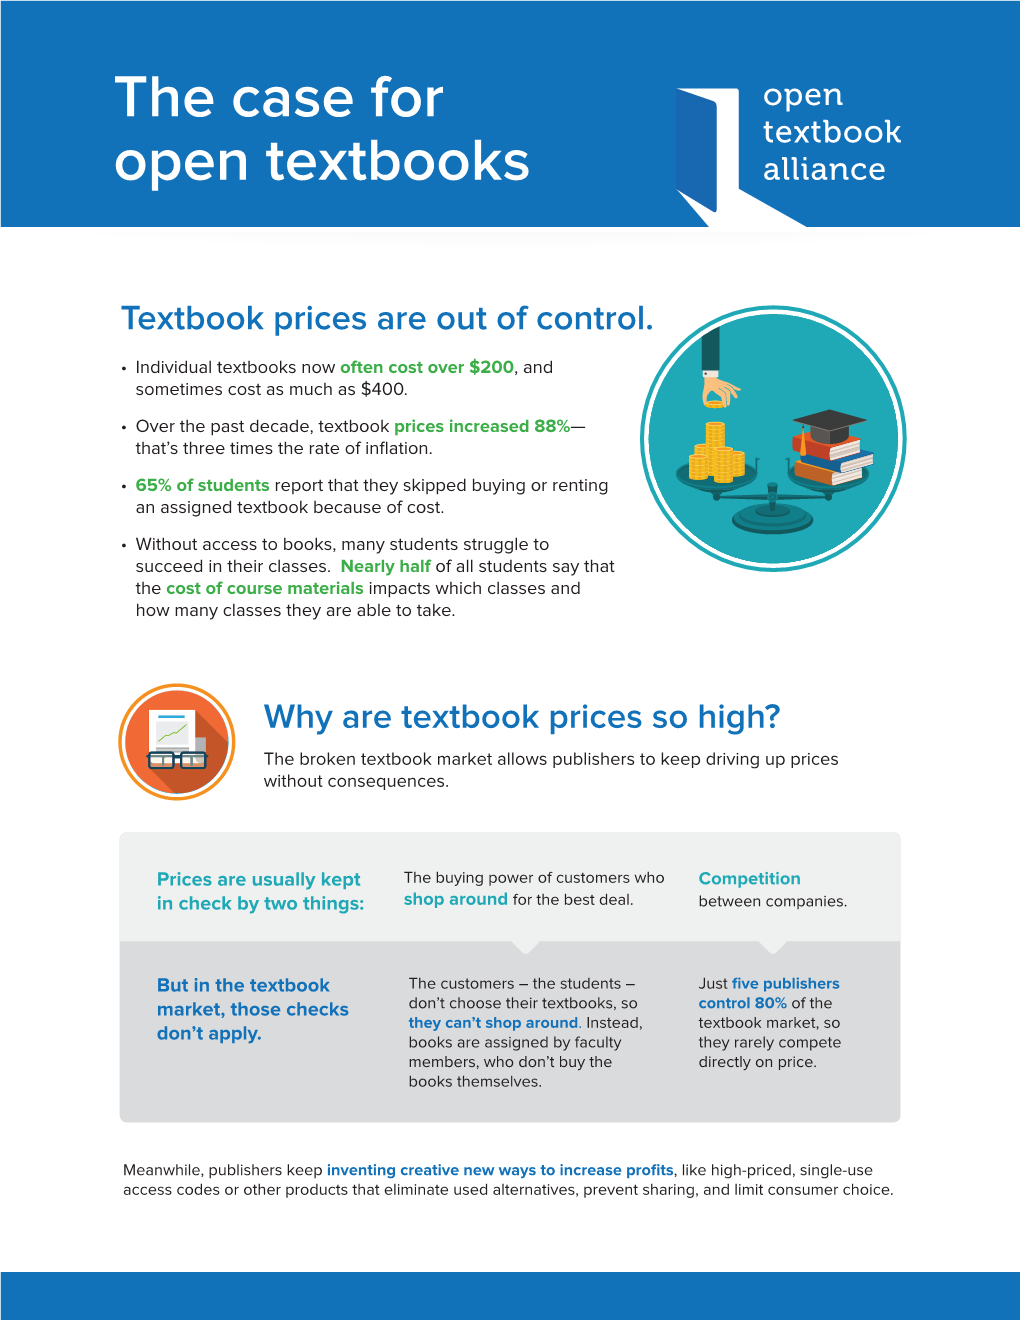 The Case for Open Textbooks